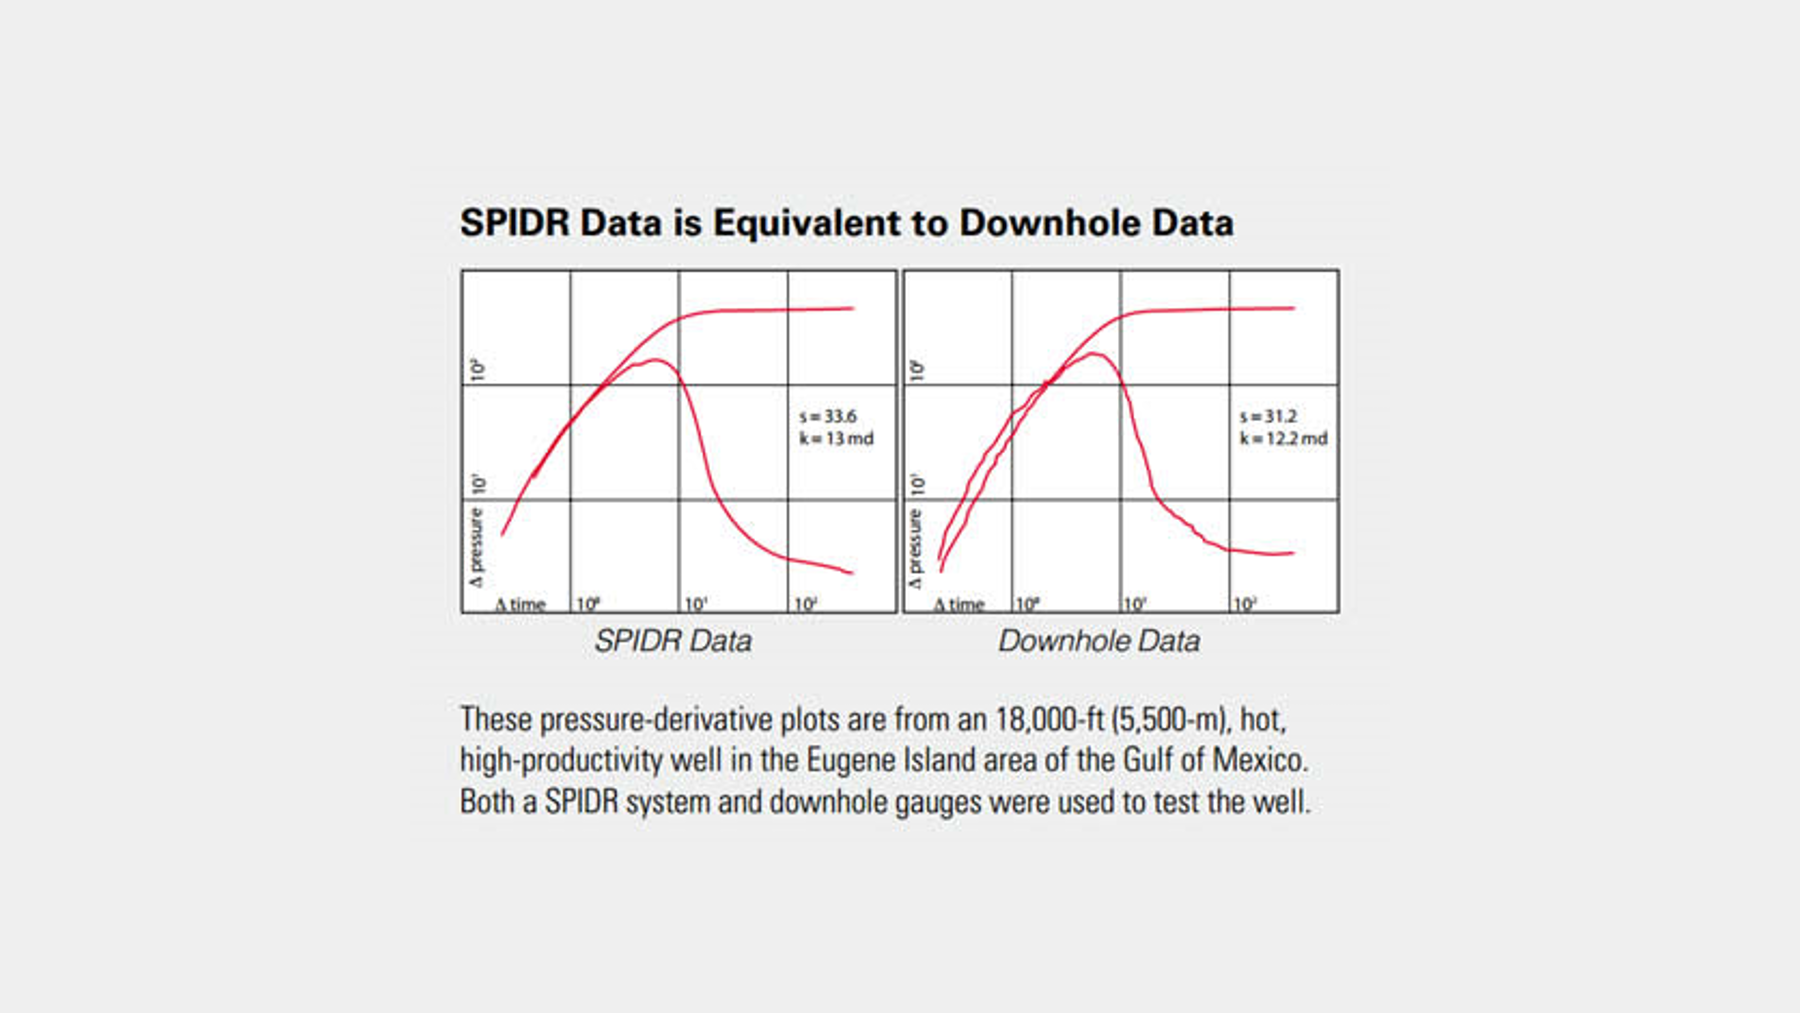 SPIDR data is equivalent to downhole data.